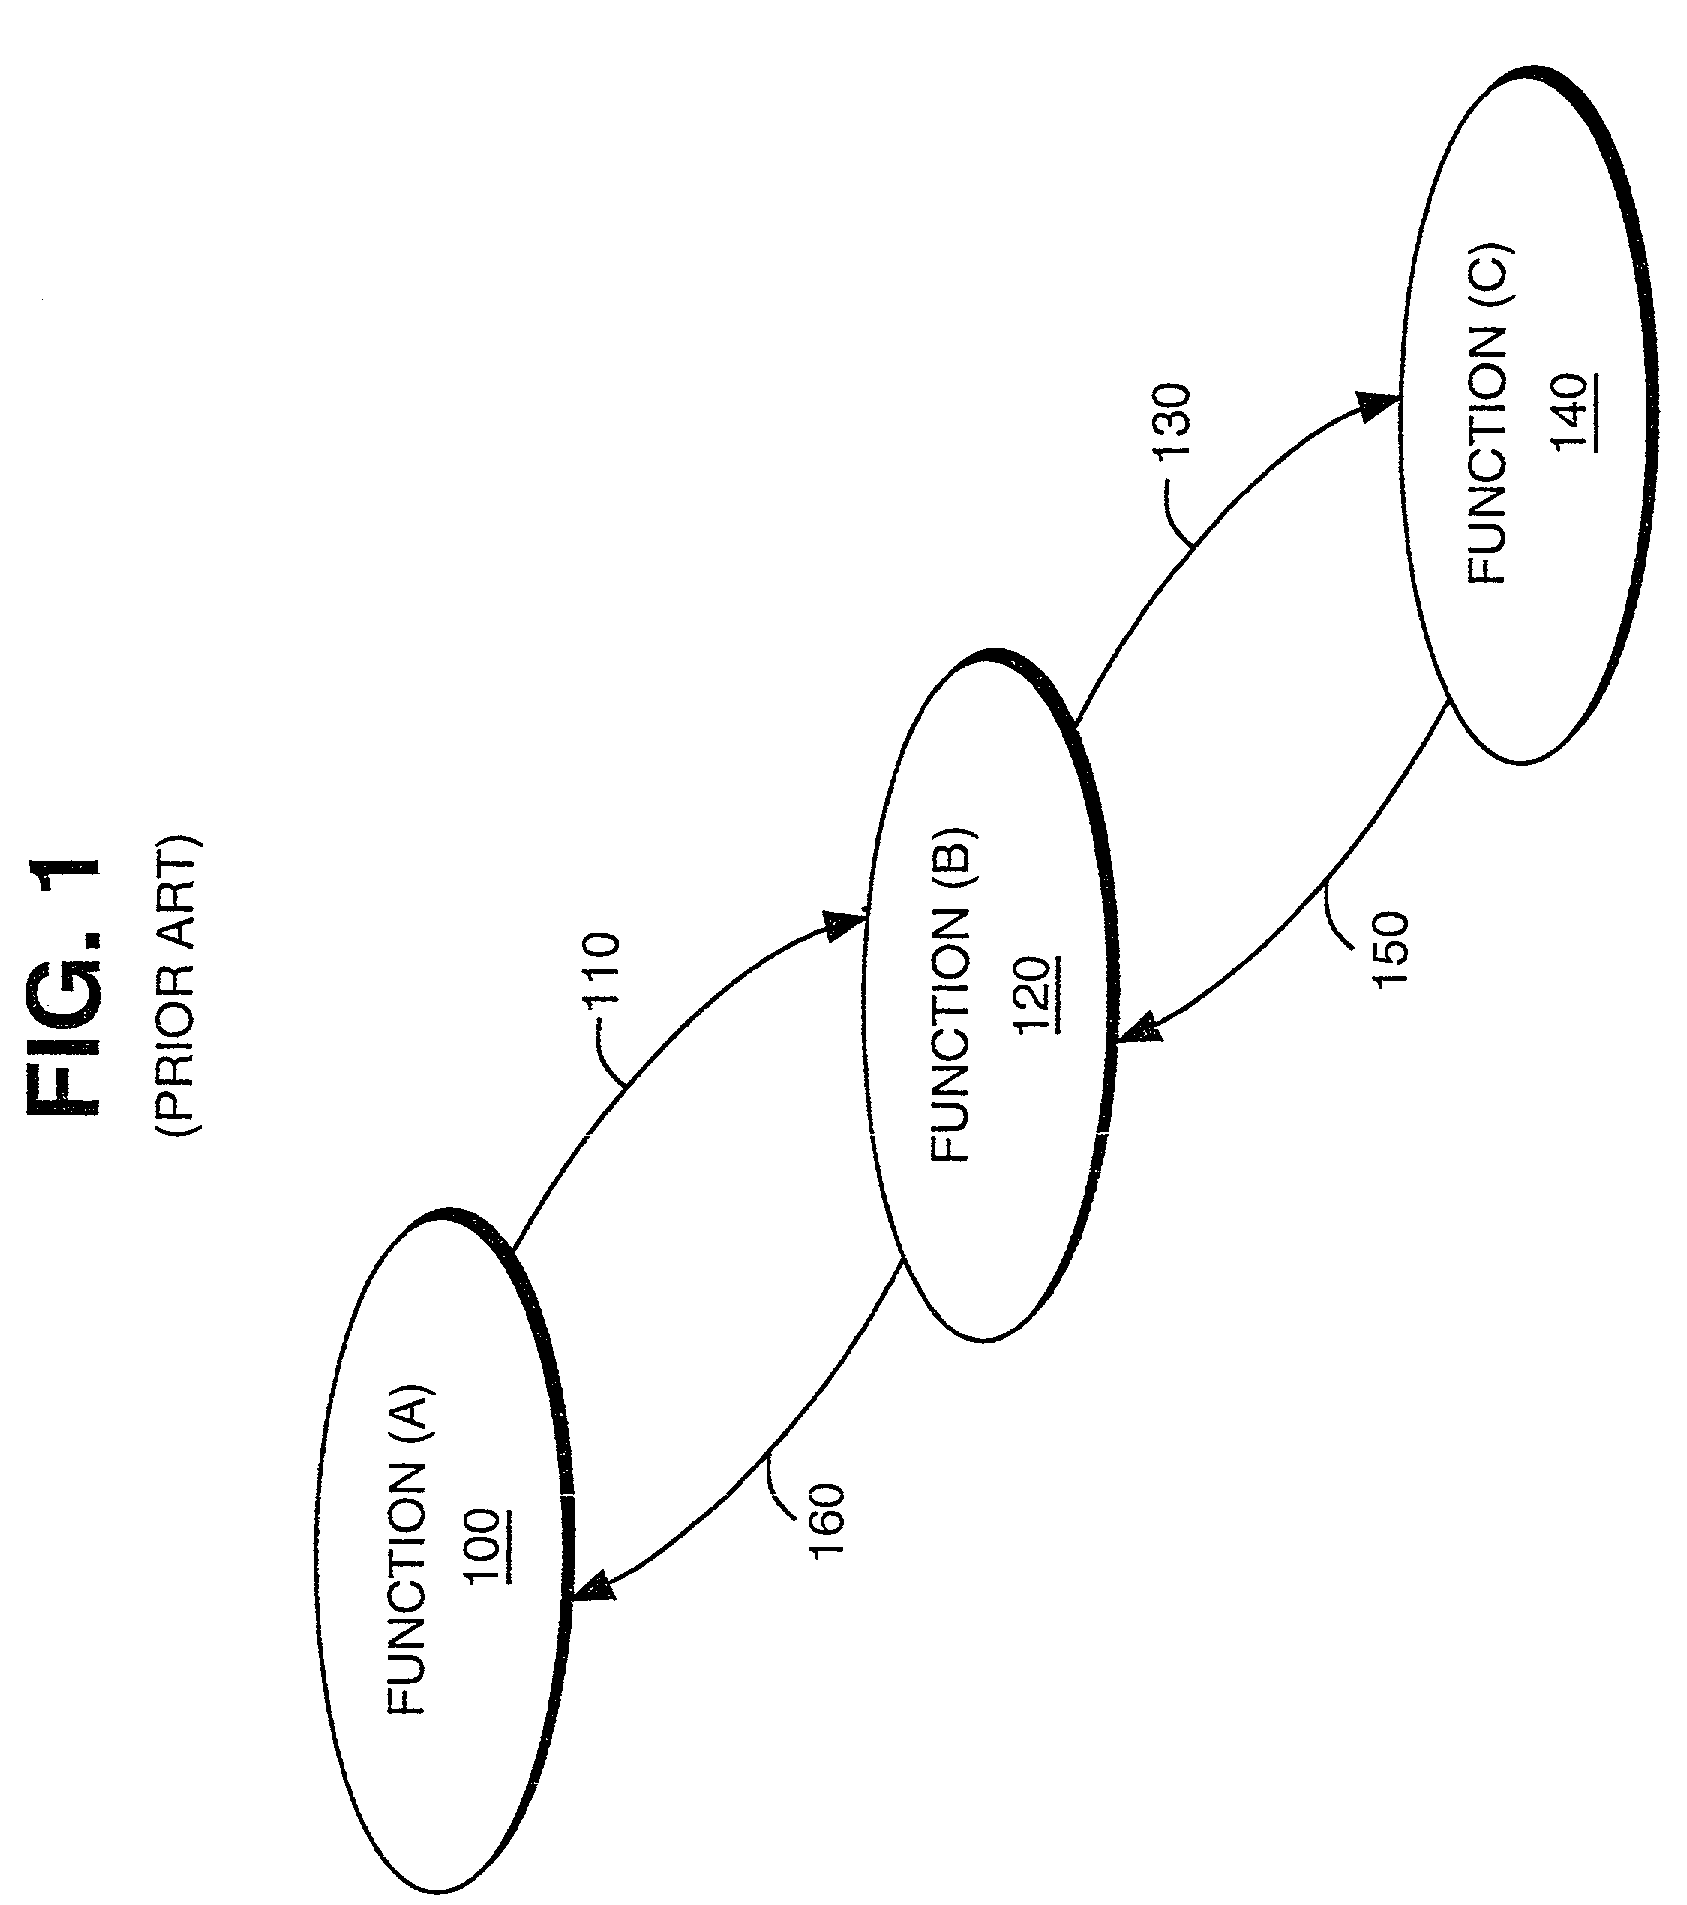 Error handling and representation in a computer-aided design environment